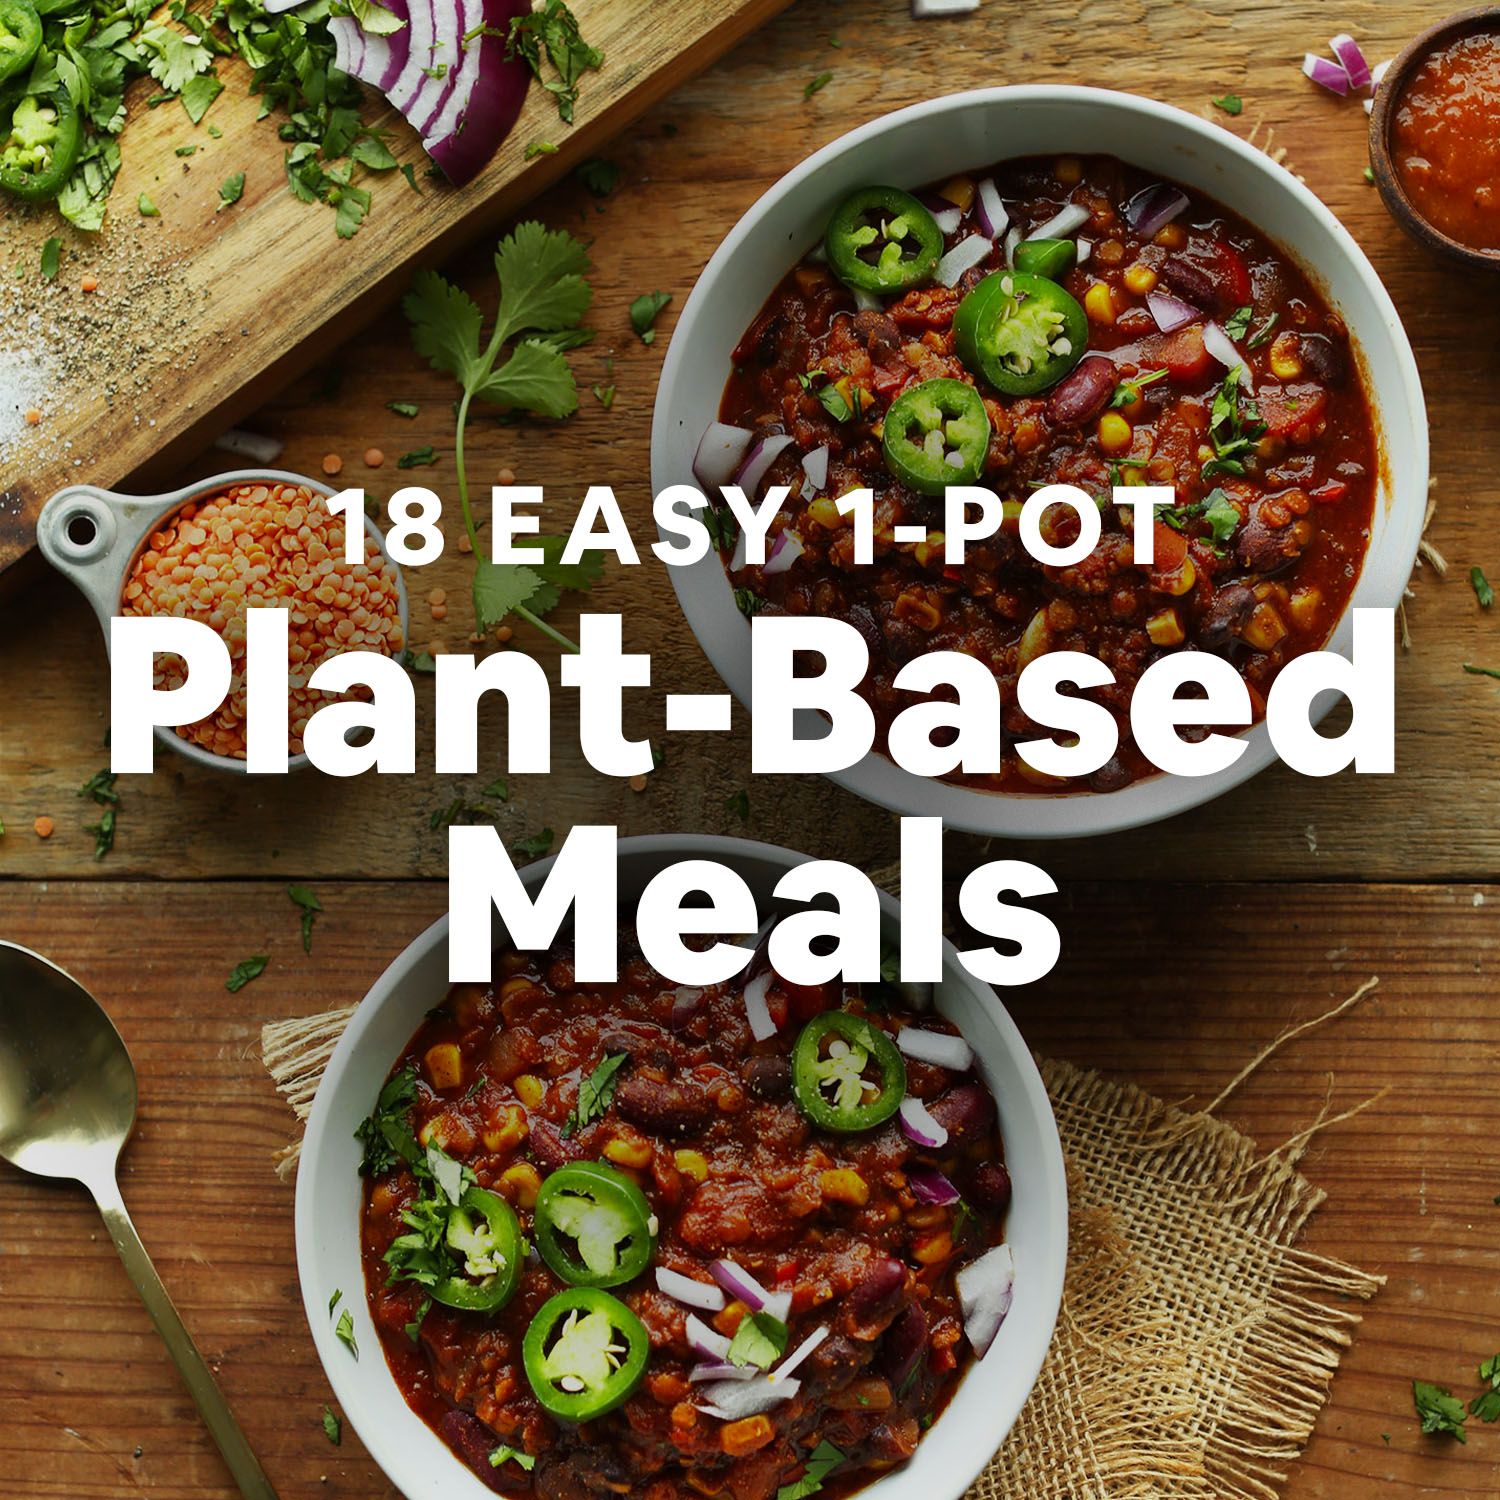 Plant-Based Comfort Foods: Satisfying Cravings Without Animal Products